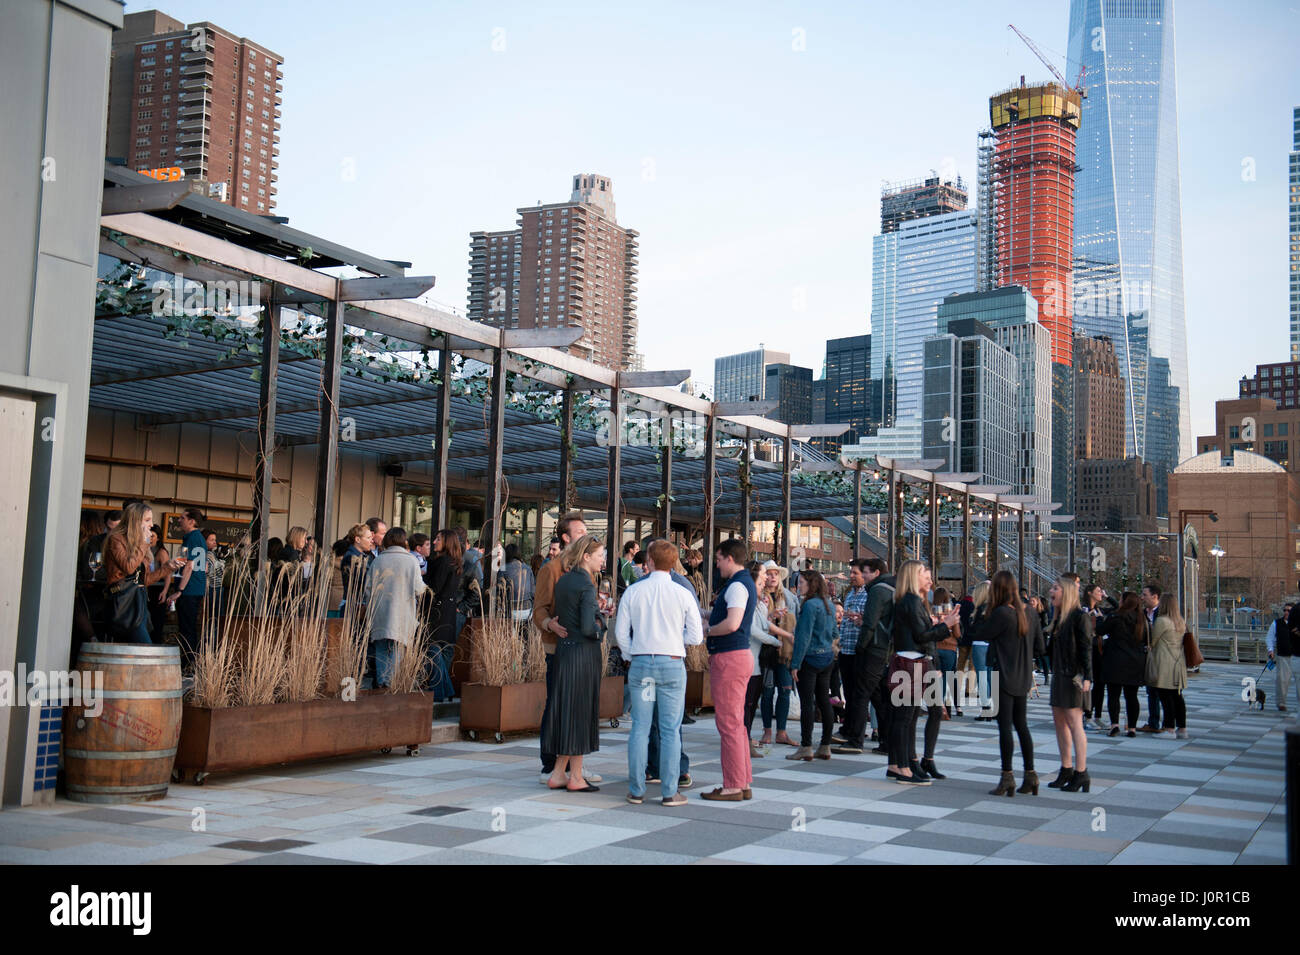 City Vineyard, a restaurant and bar, is on Pier 26 in Hudson River Park, not far from the World Trade Center in Lower Manhattan. Stock Photo